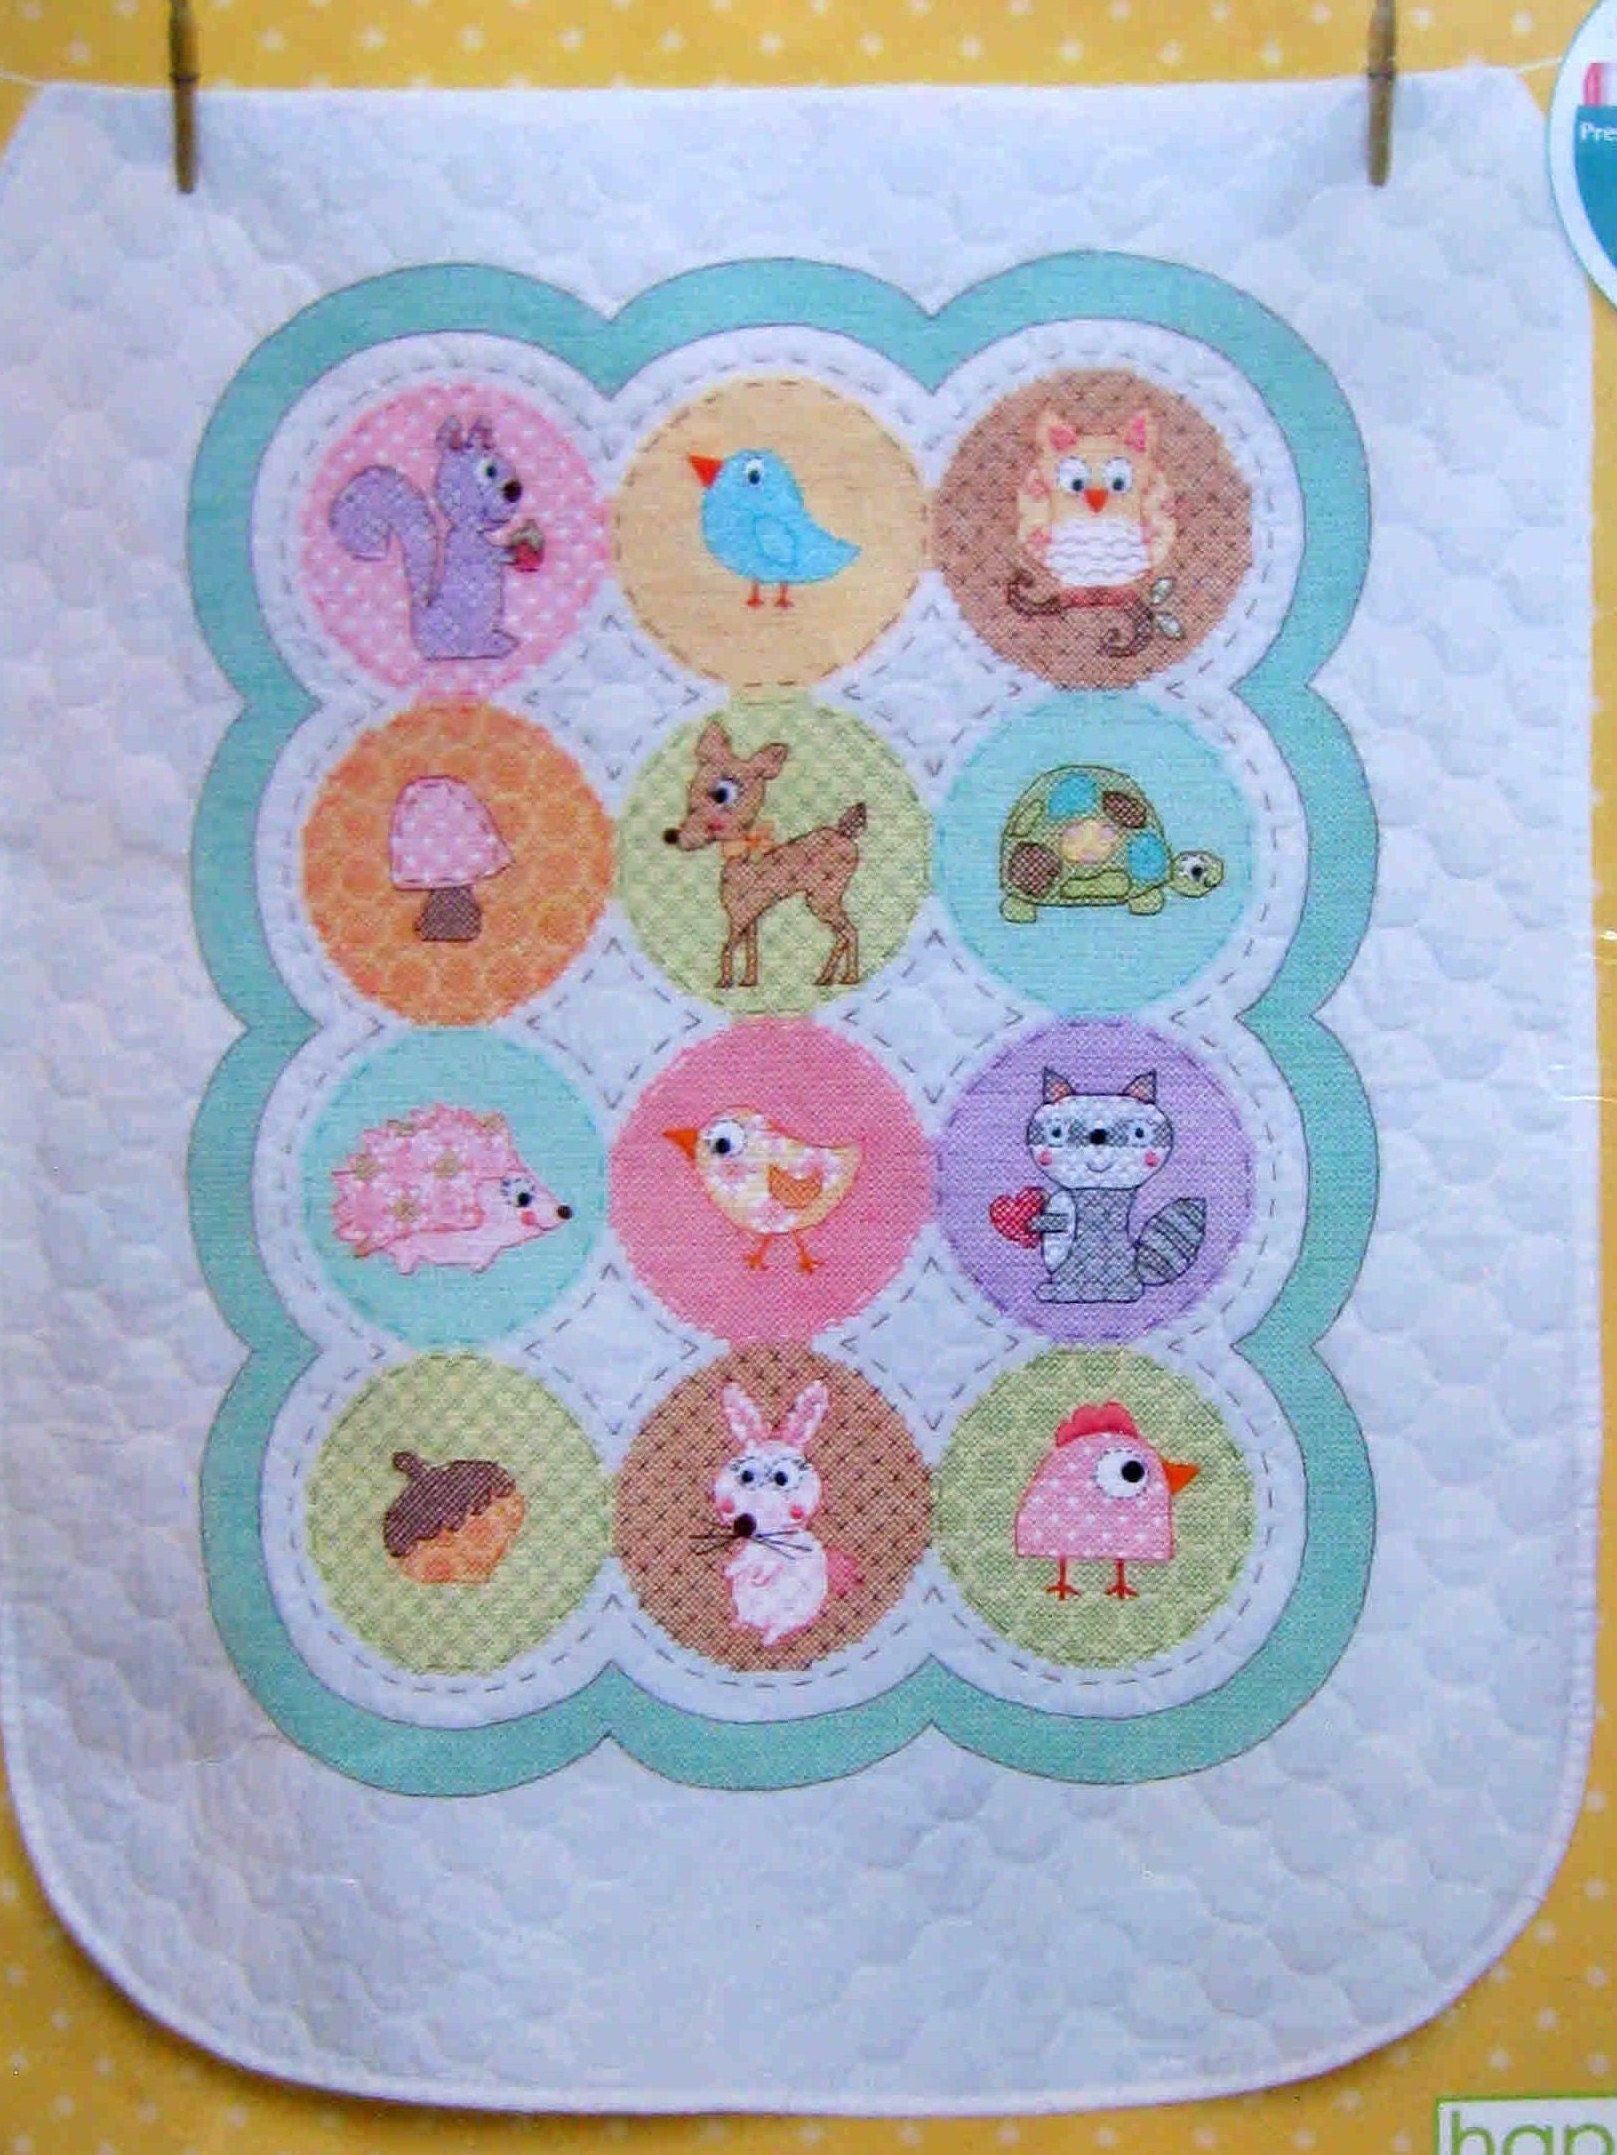 Design Works Stamped Quilt Cross Stitch Kit 34X43 Baby's Forest